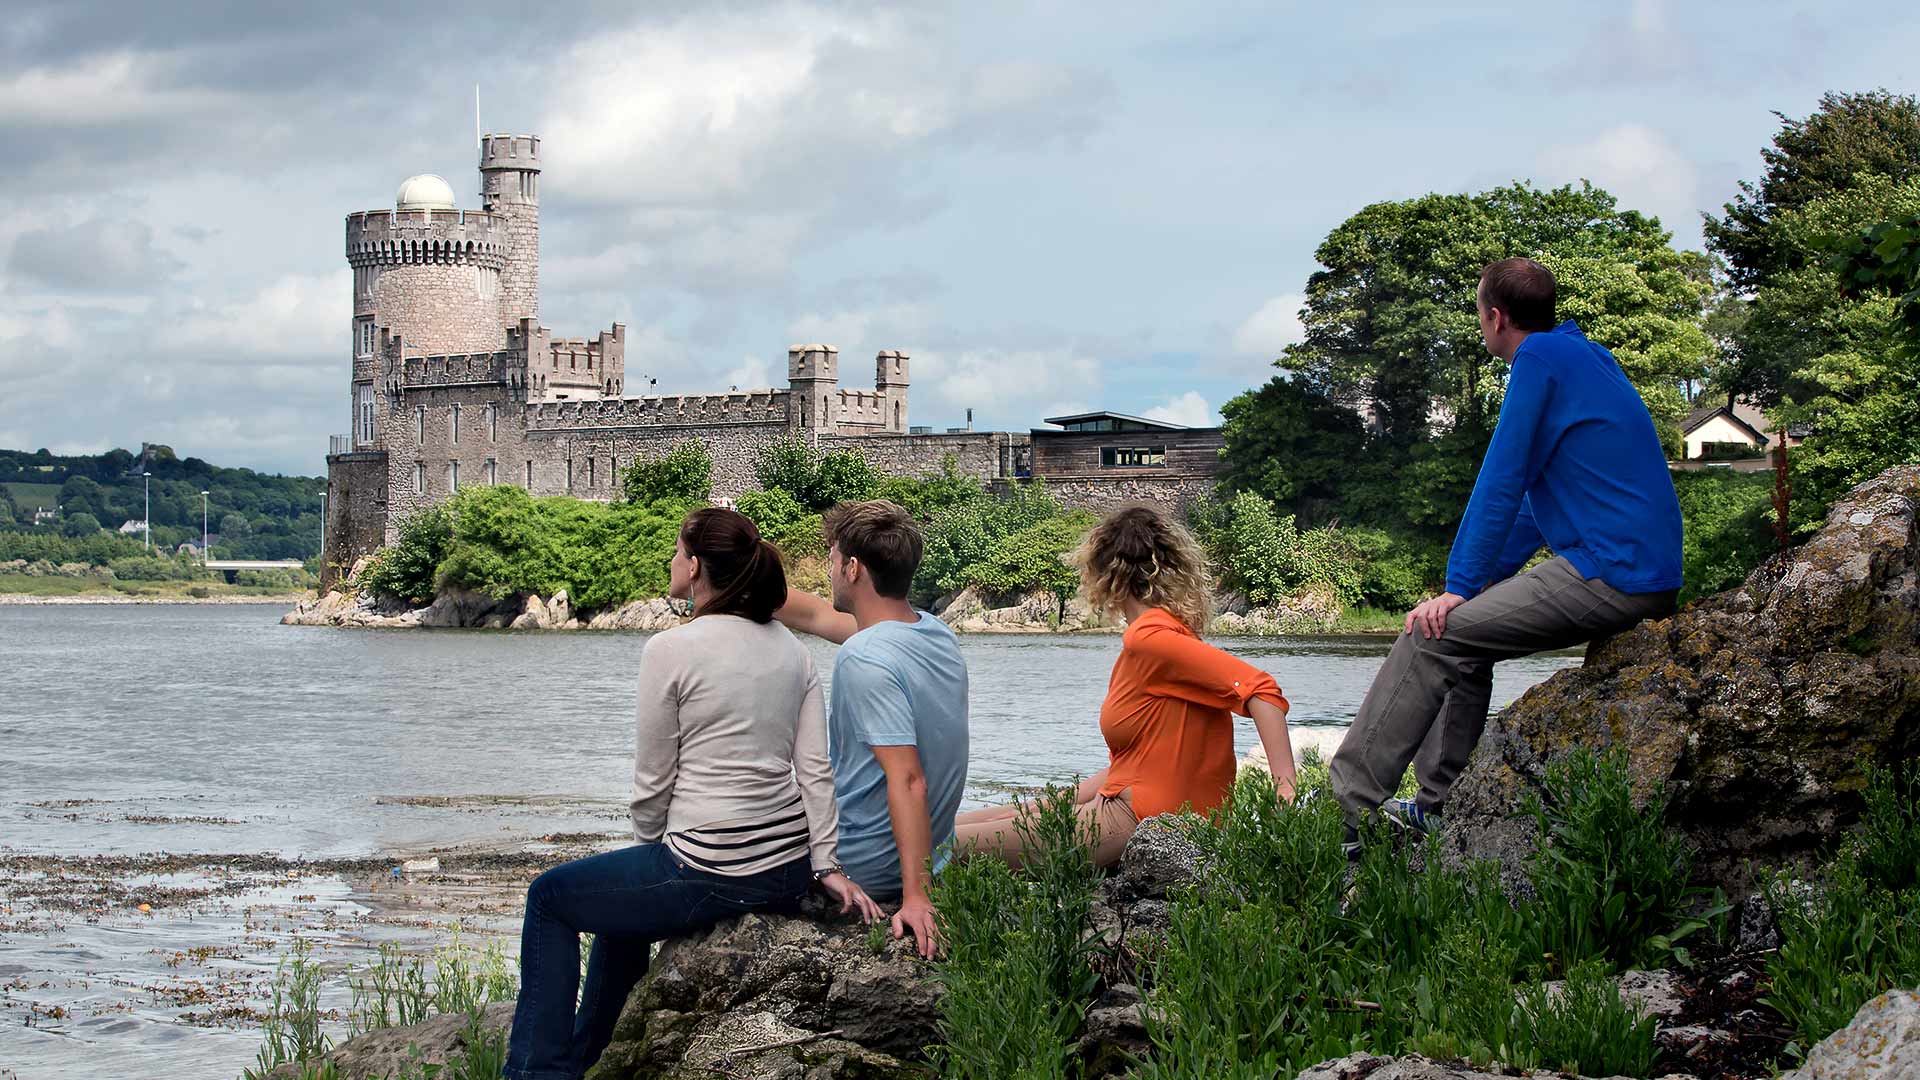 People sitting on the shore viewing Blackrock Castle Observatory